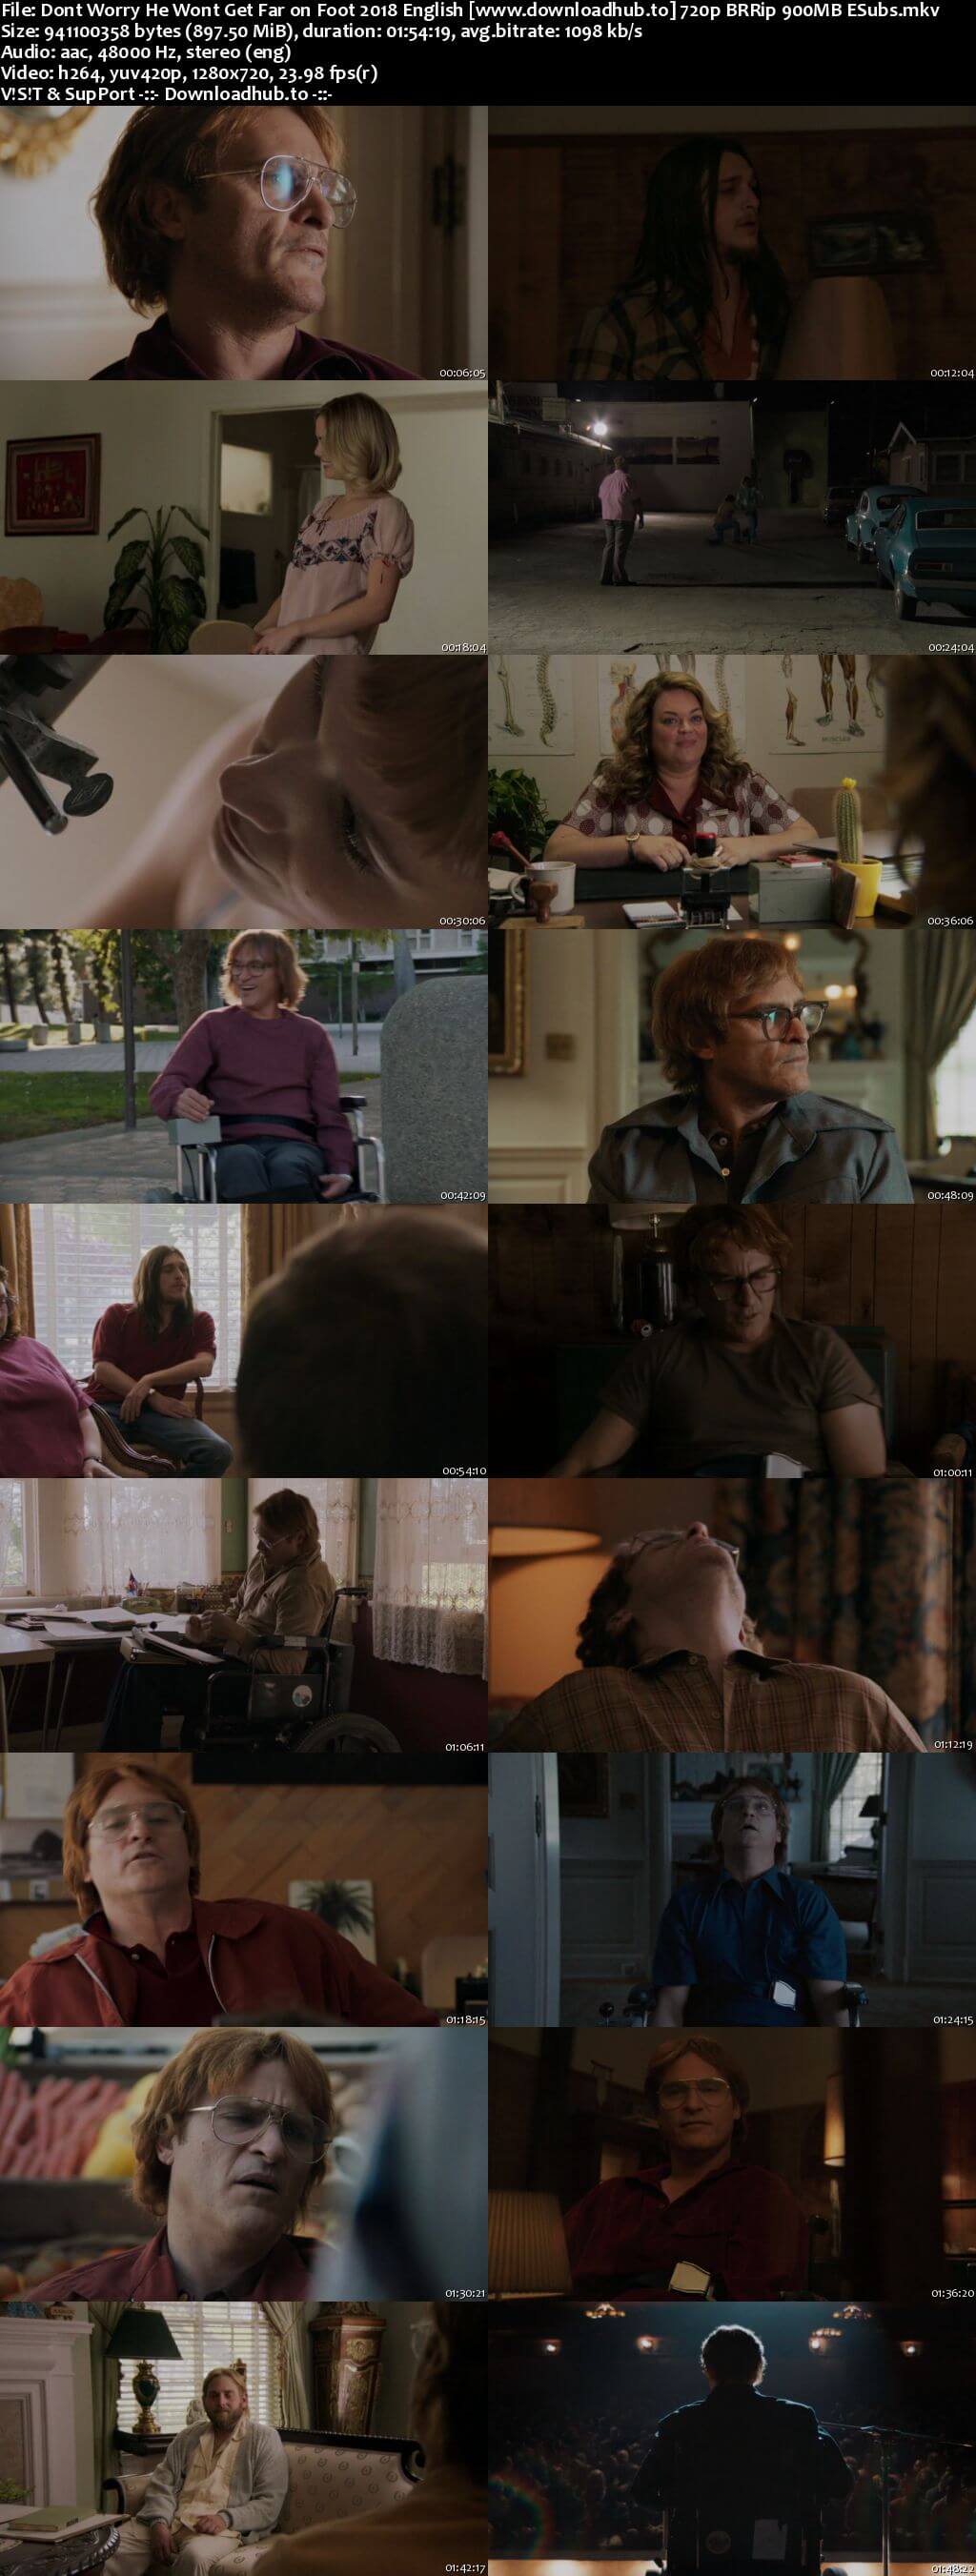 Dont Worry He Wont Get Far on Foot 2018 English 720p BRRip 900MB ESubs